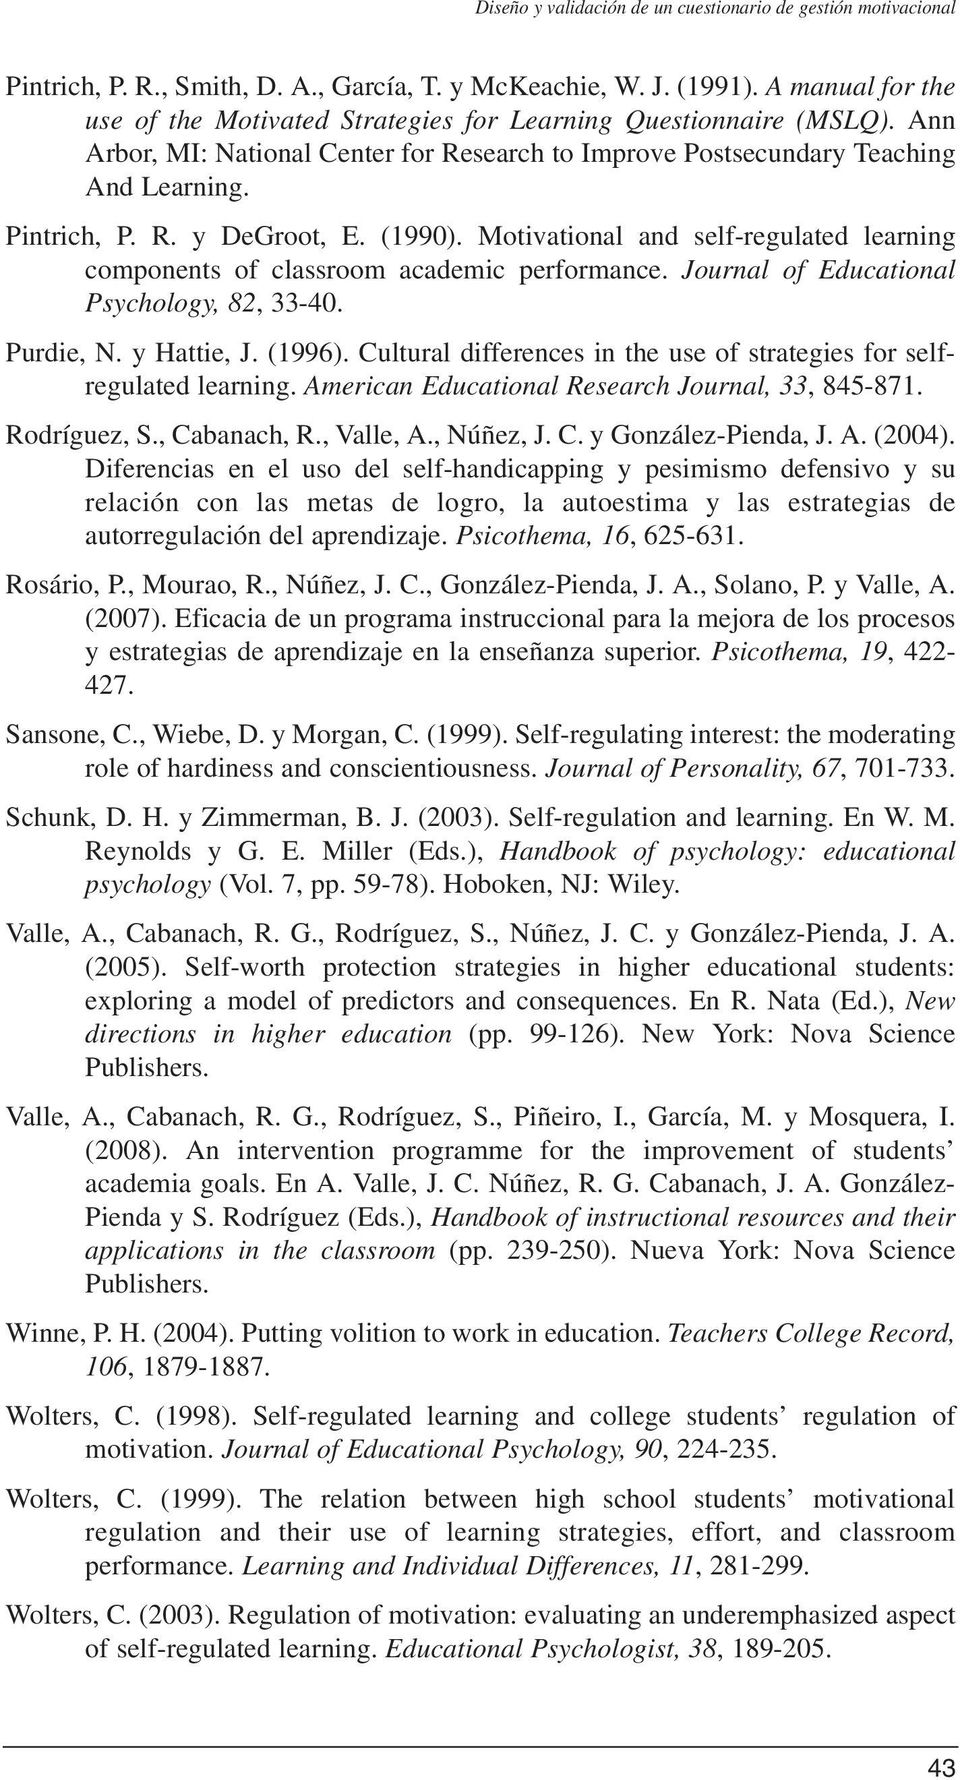 (1990). Motivational and self-regulated learning components of classroom academic performance. Journal of Educational Psychology, 82, 33-40. Purdie, N. y Hattie, J. (1996).